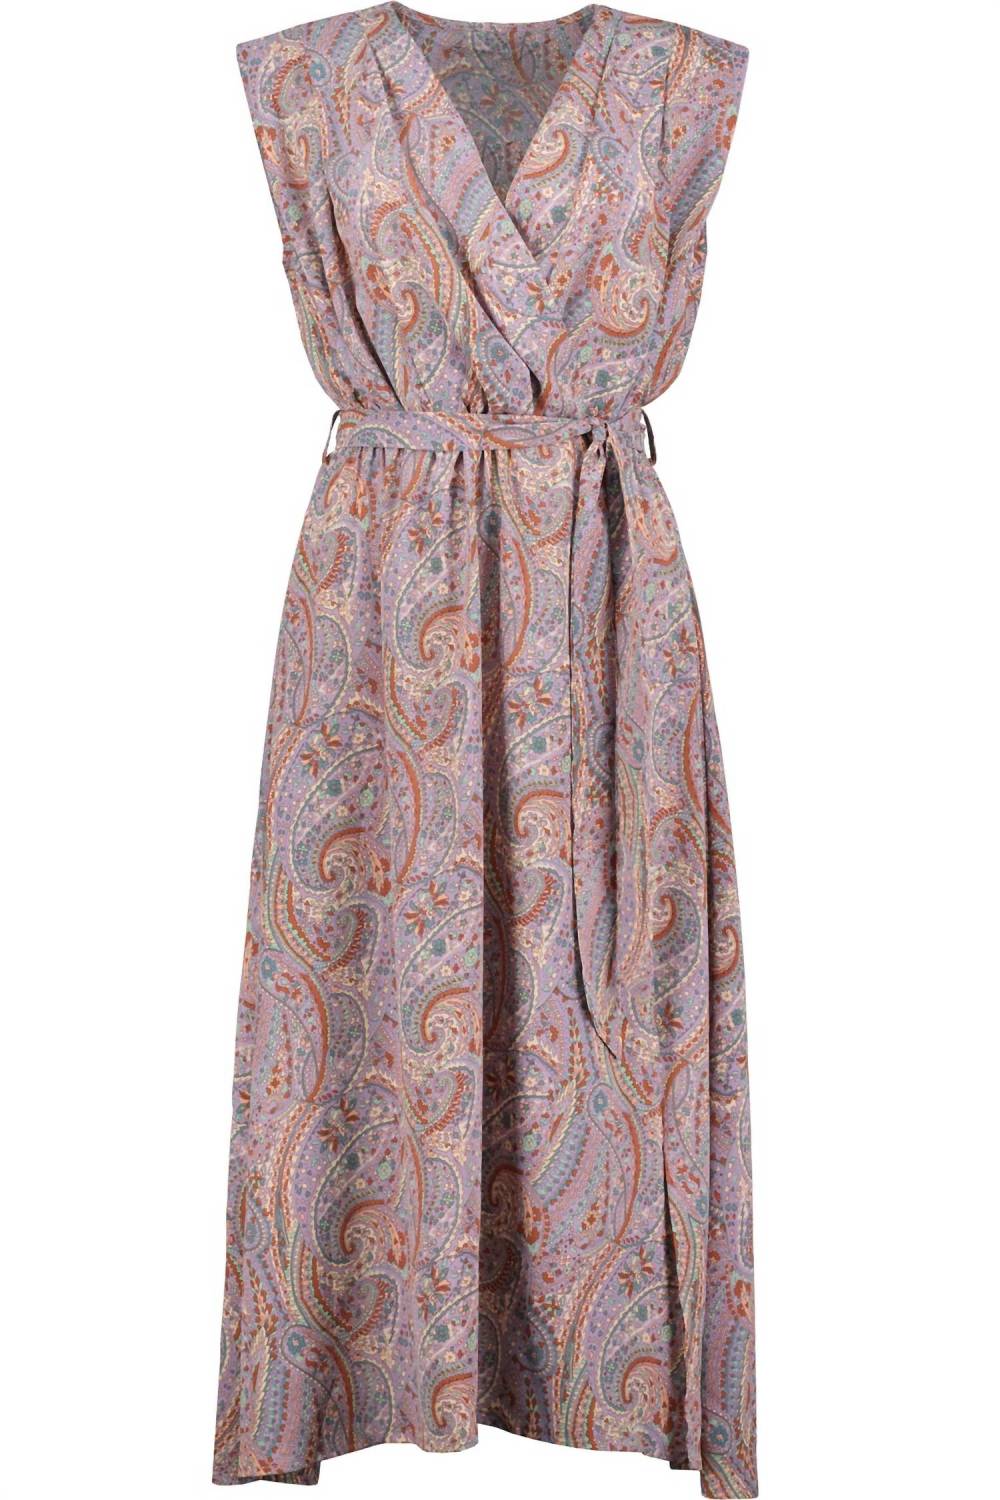 bishop + young - Butterfly Effect Aeries Wrap Dress